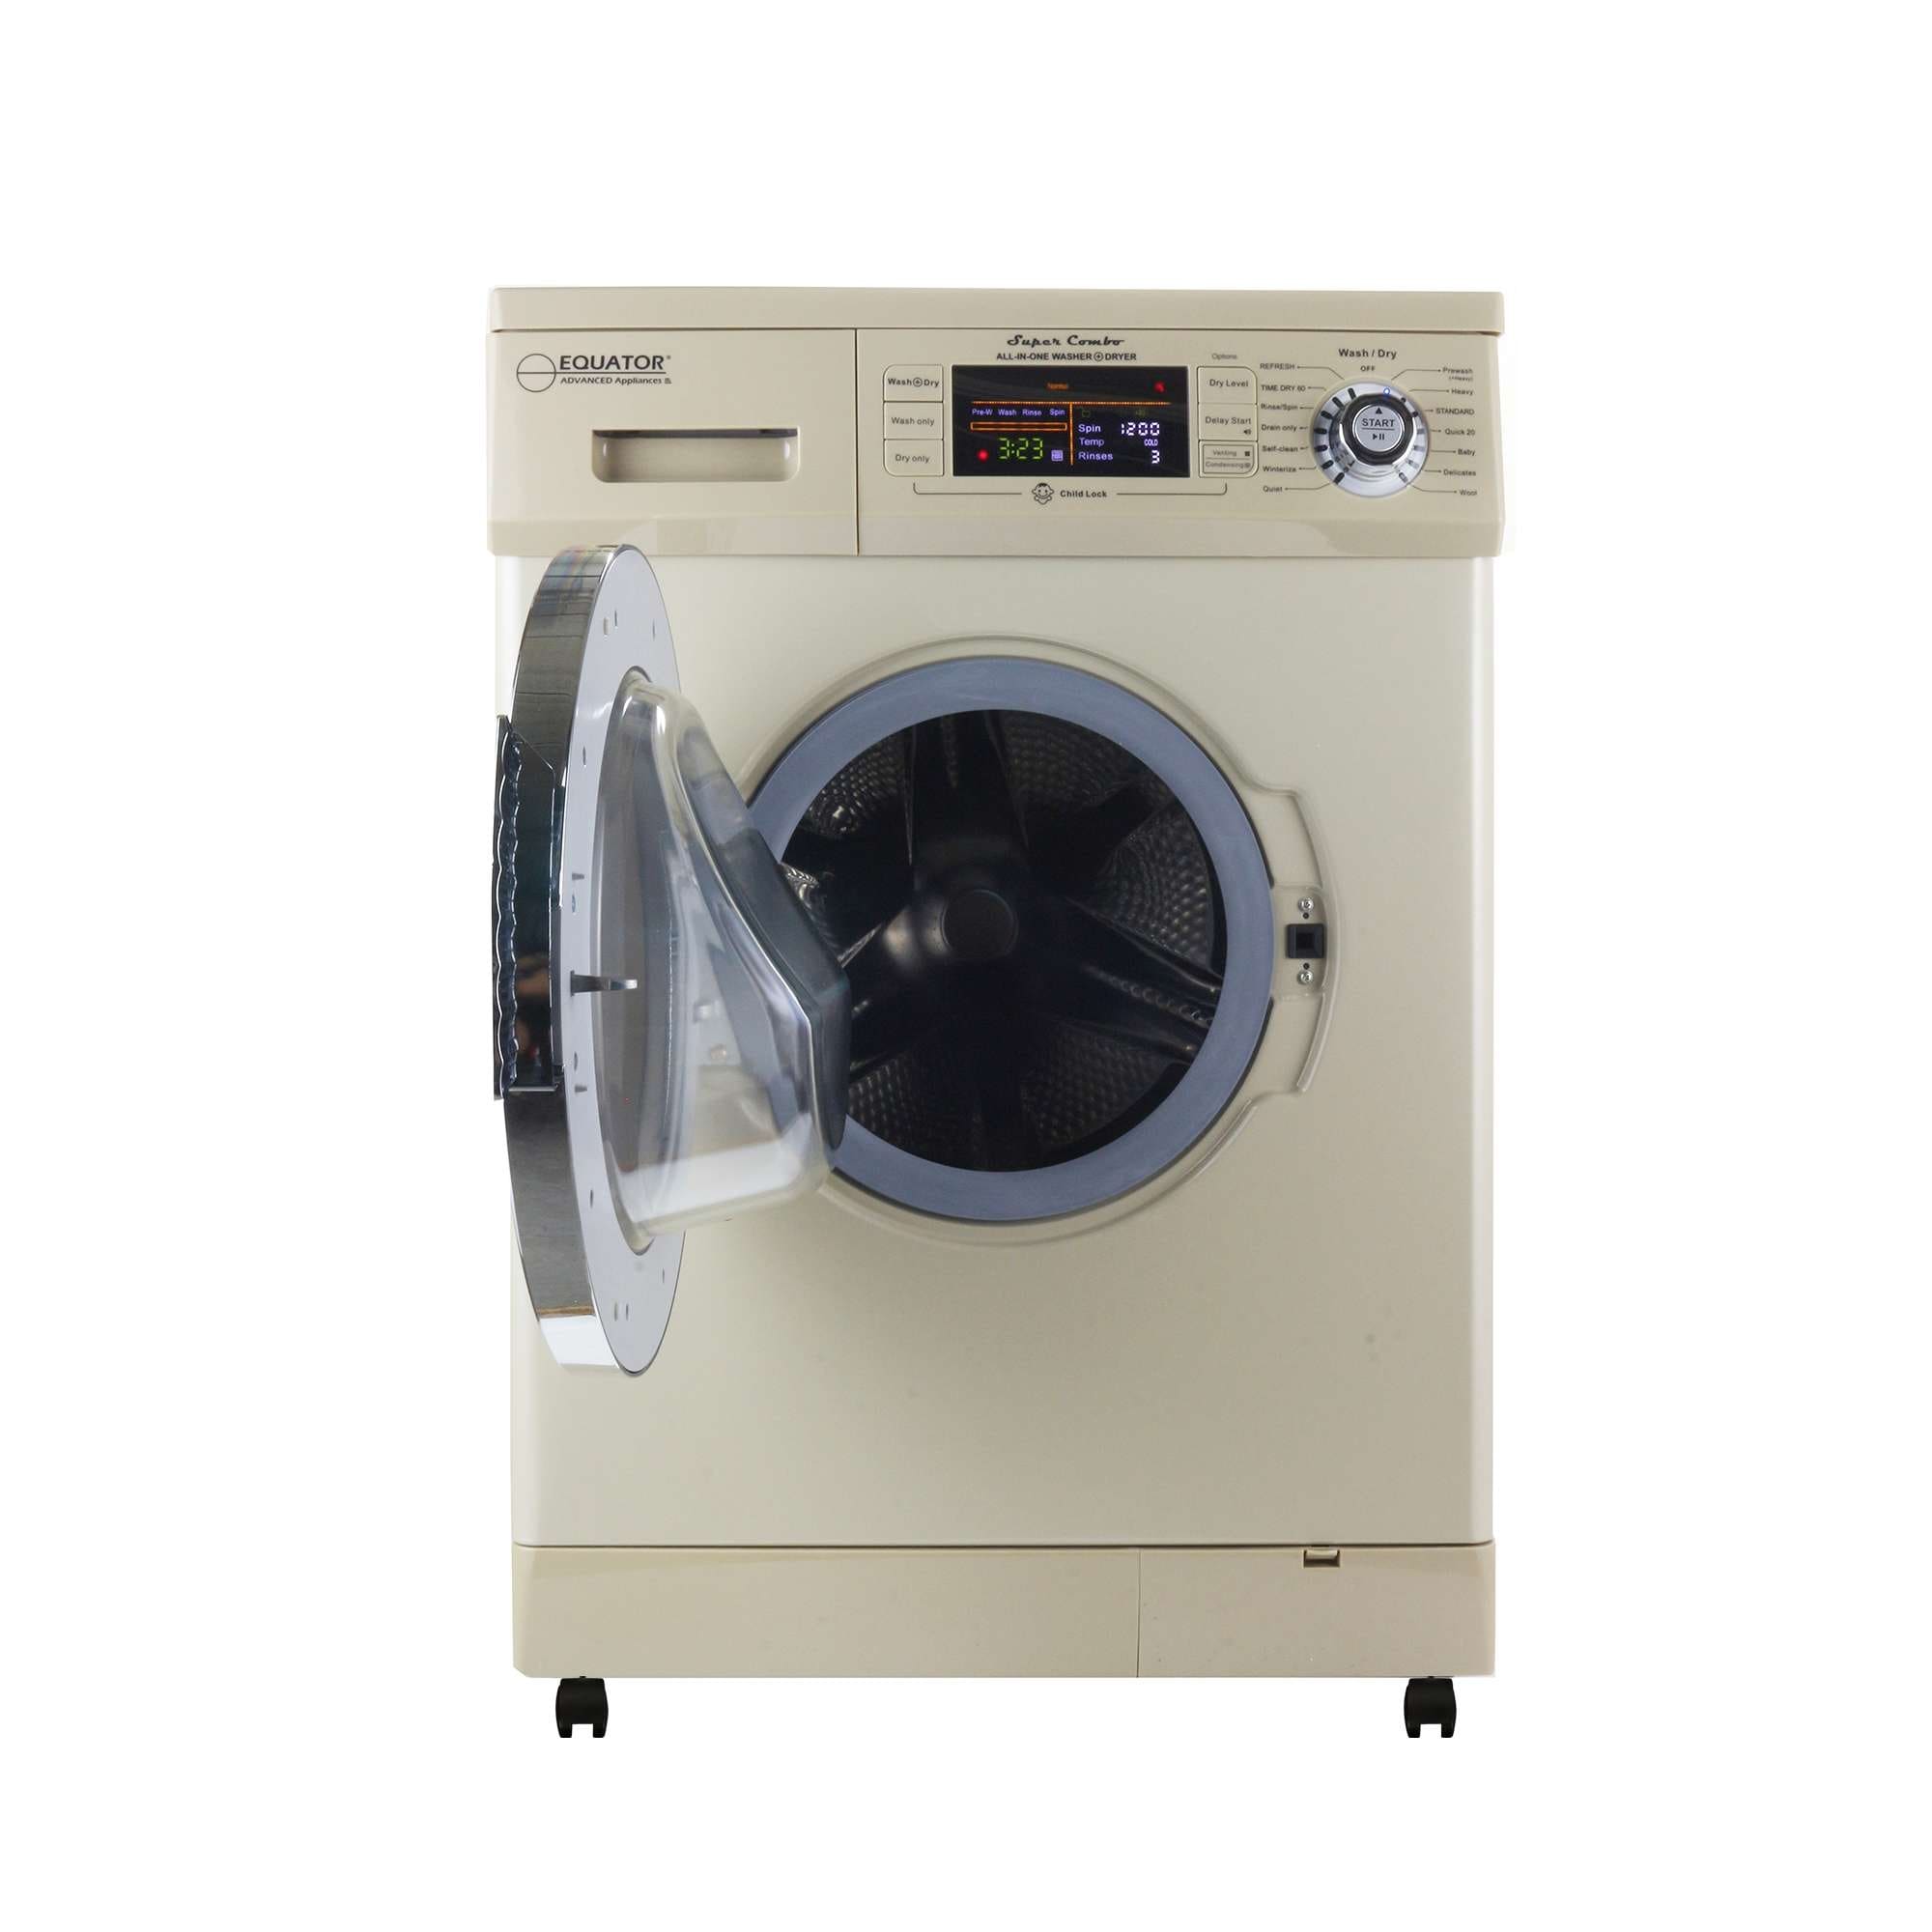  COSTWAY Portable Clothes Dryer, Ventless Laundry Dryer